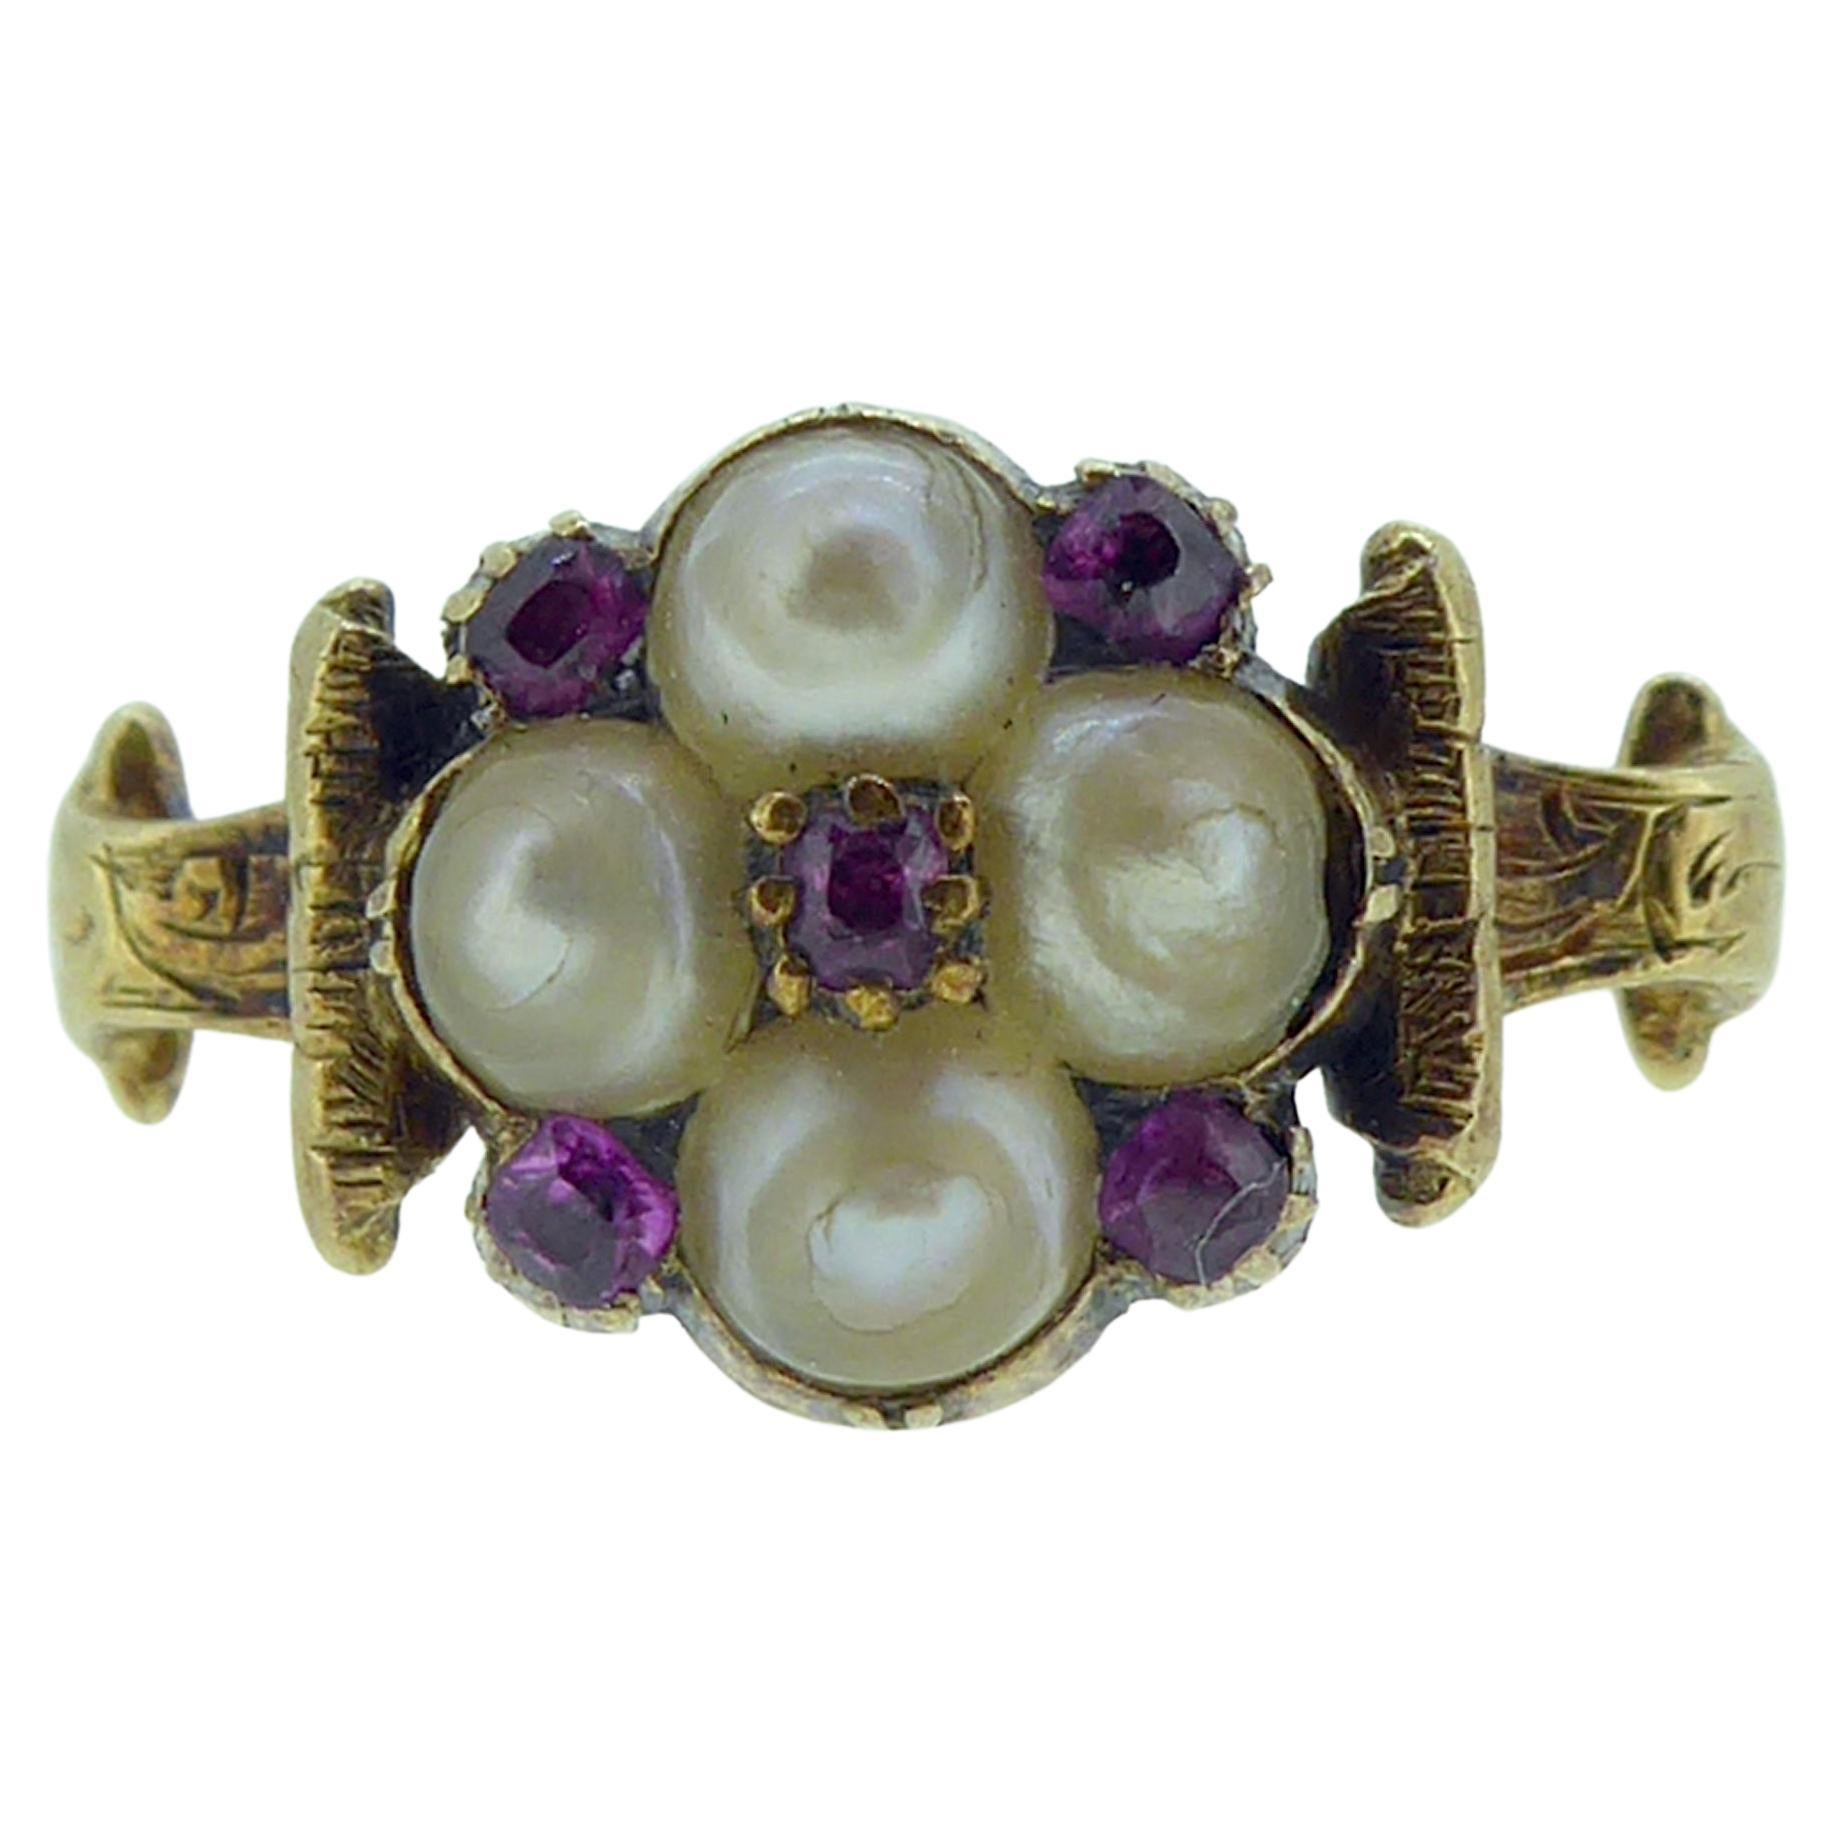 Antique Victorian Garnet and Pearl Cluster Ring, Circa 1890s